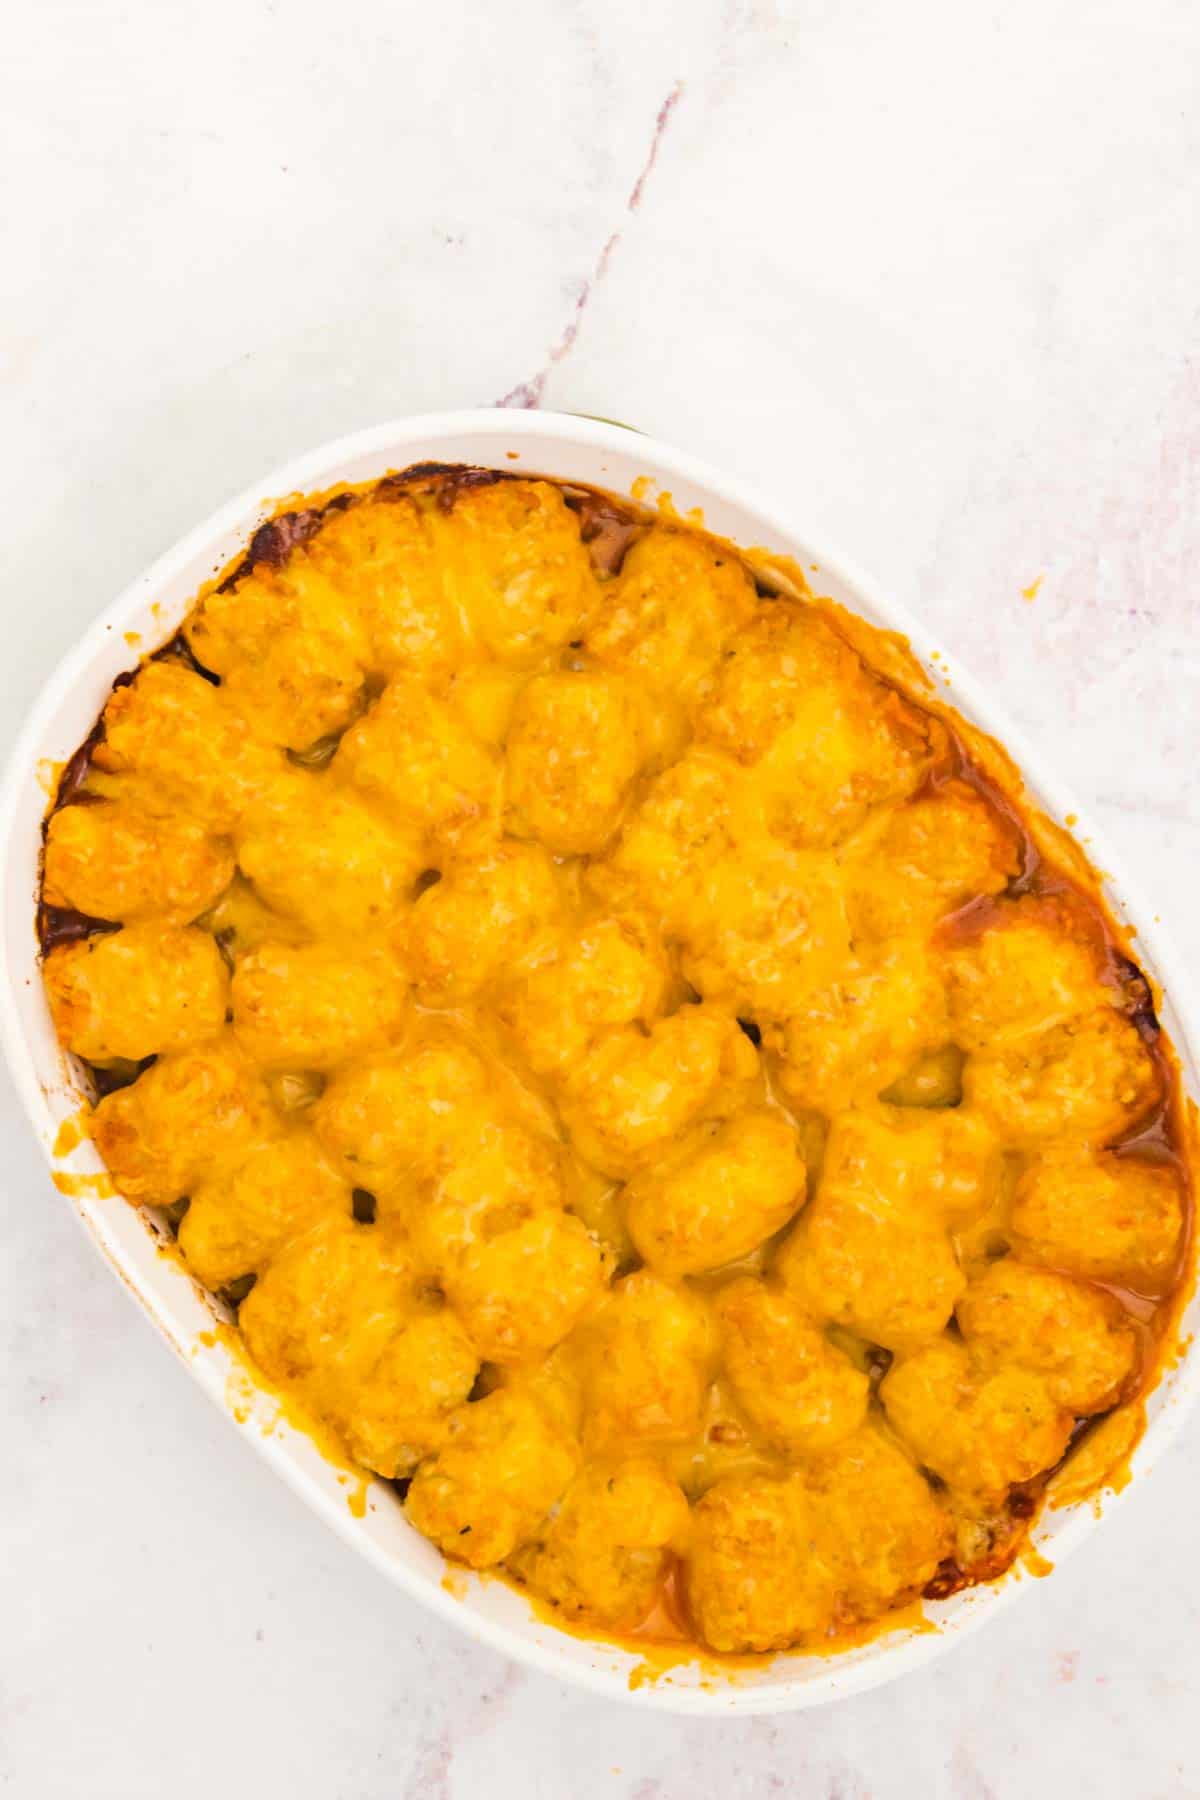 Overhead view of baked tater tot shepherd's pie covered with melted cheese.